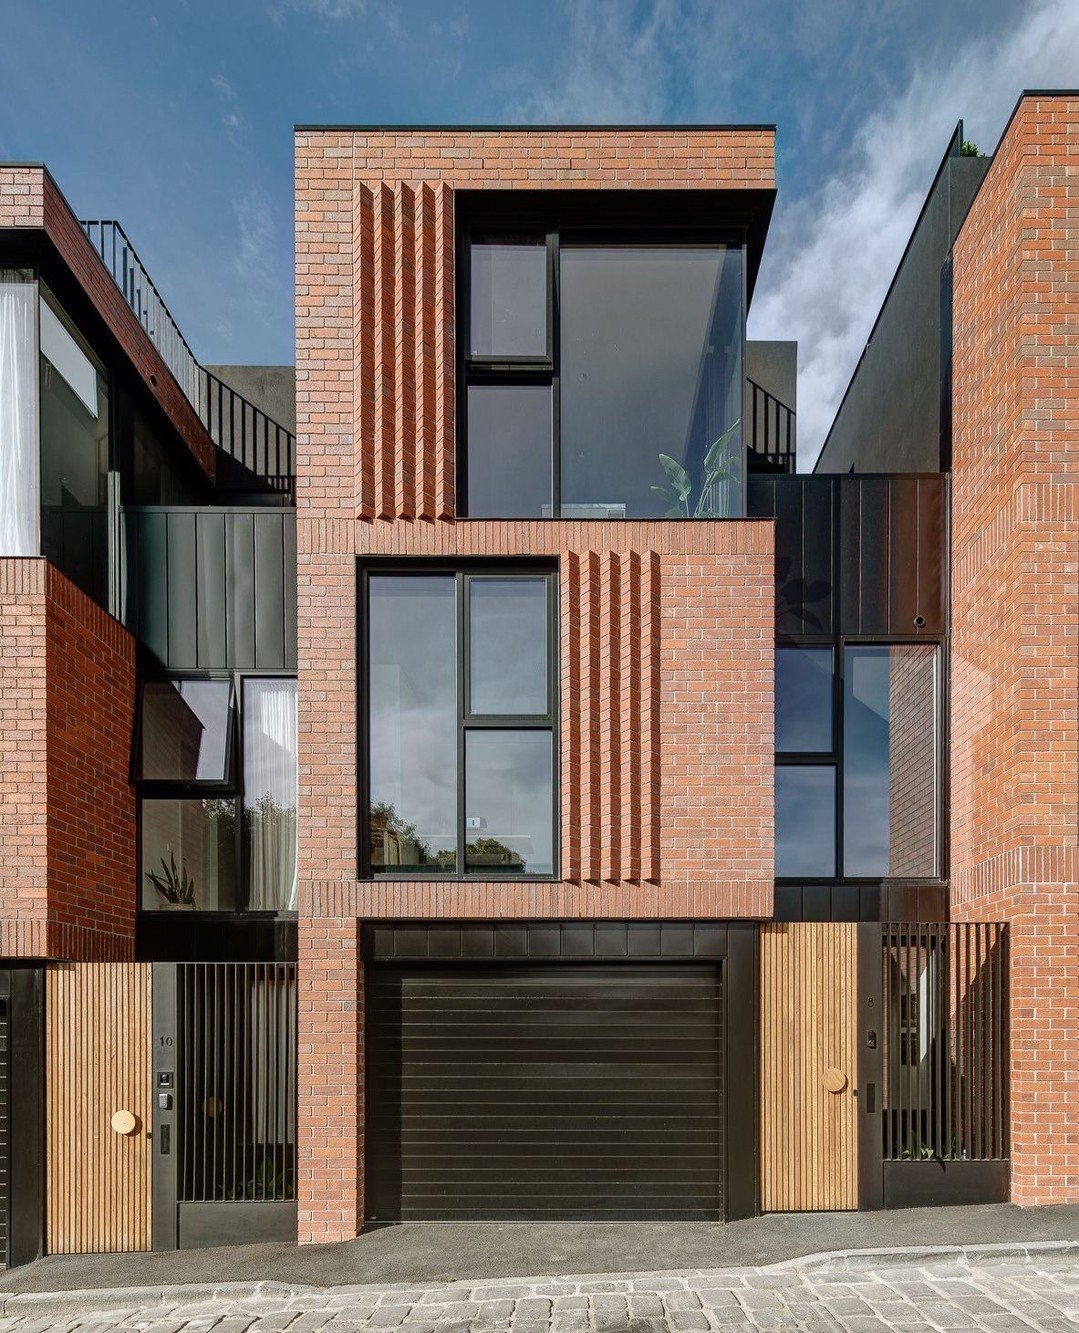 The Dalgety Street St Kilda townhouses feature two distinct colour variations of Krause Bricks, with handsome Heritage Reds highlighting the striking exterior while the more subdued Ghost Grey&rsquo;s line the interior walls. Both add visual and text